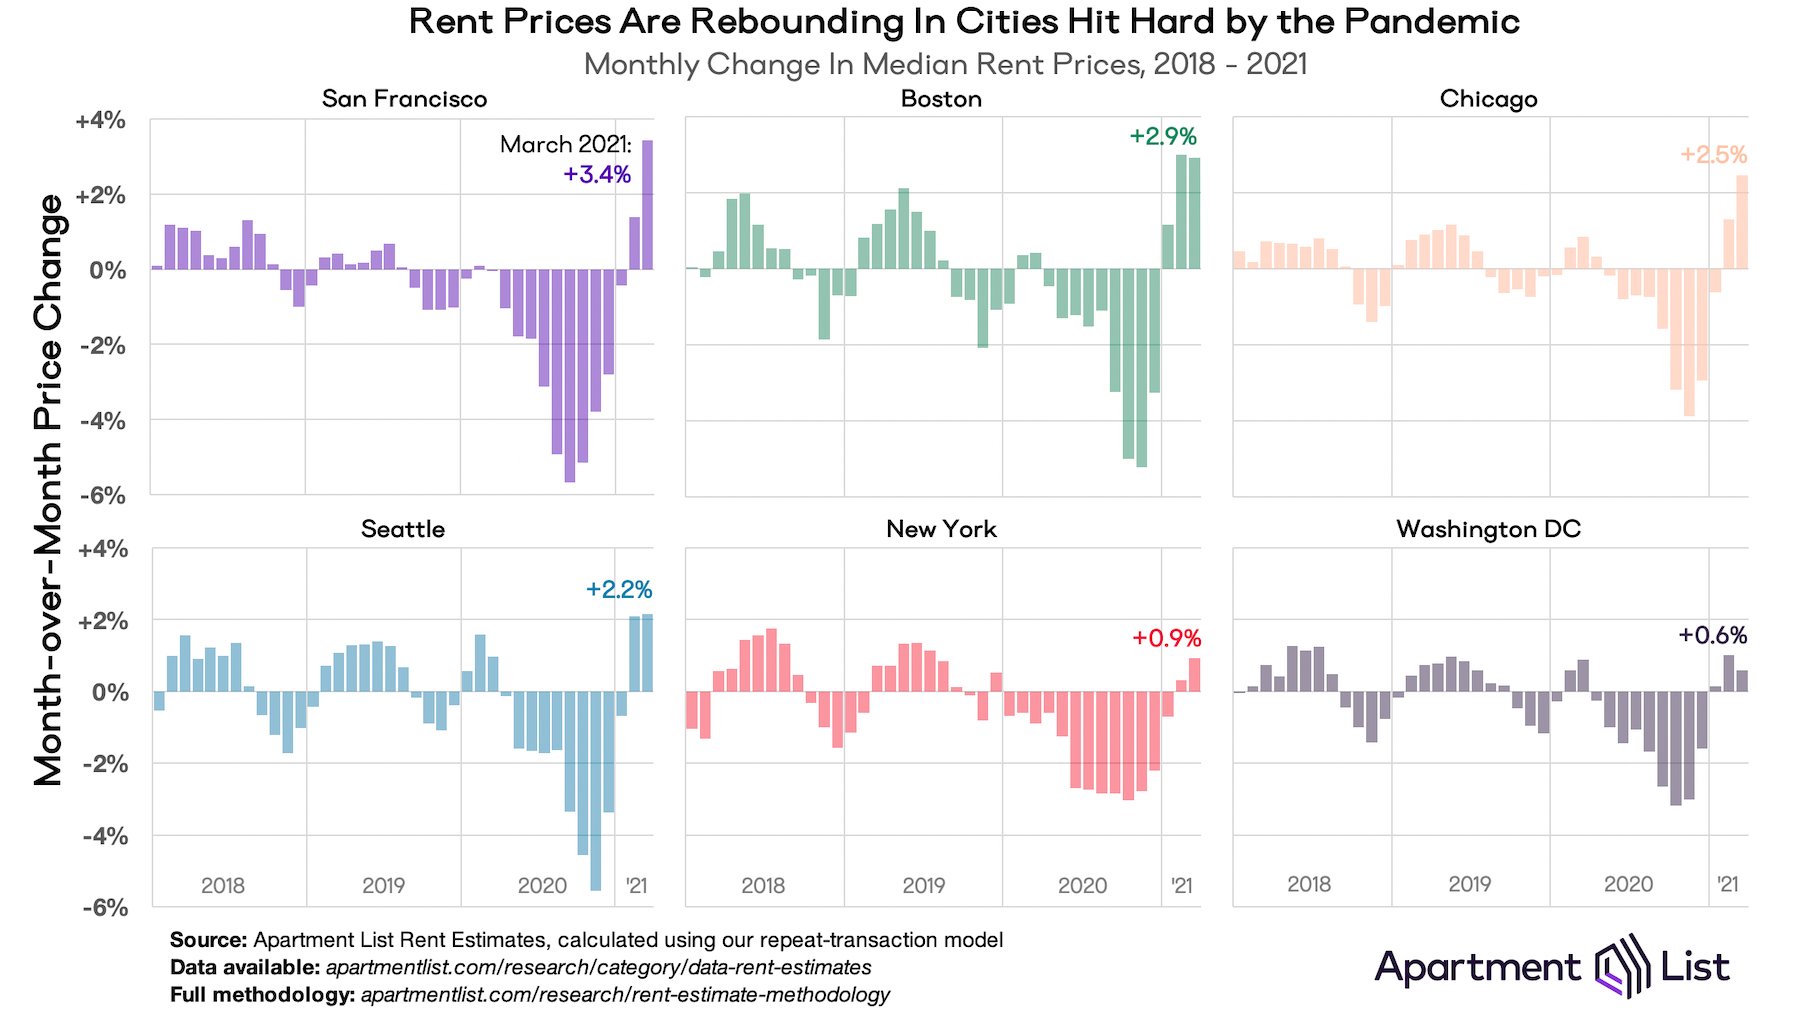 Rent prices are rebounding - golden opportunity to buy real estate